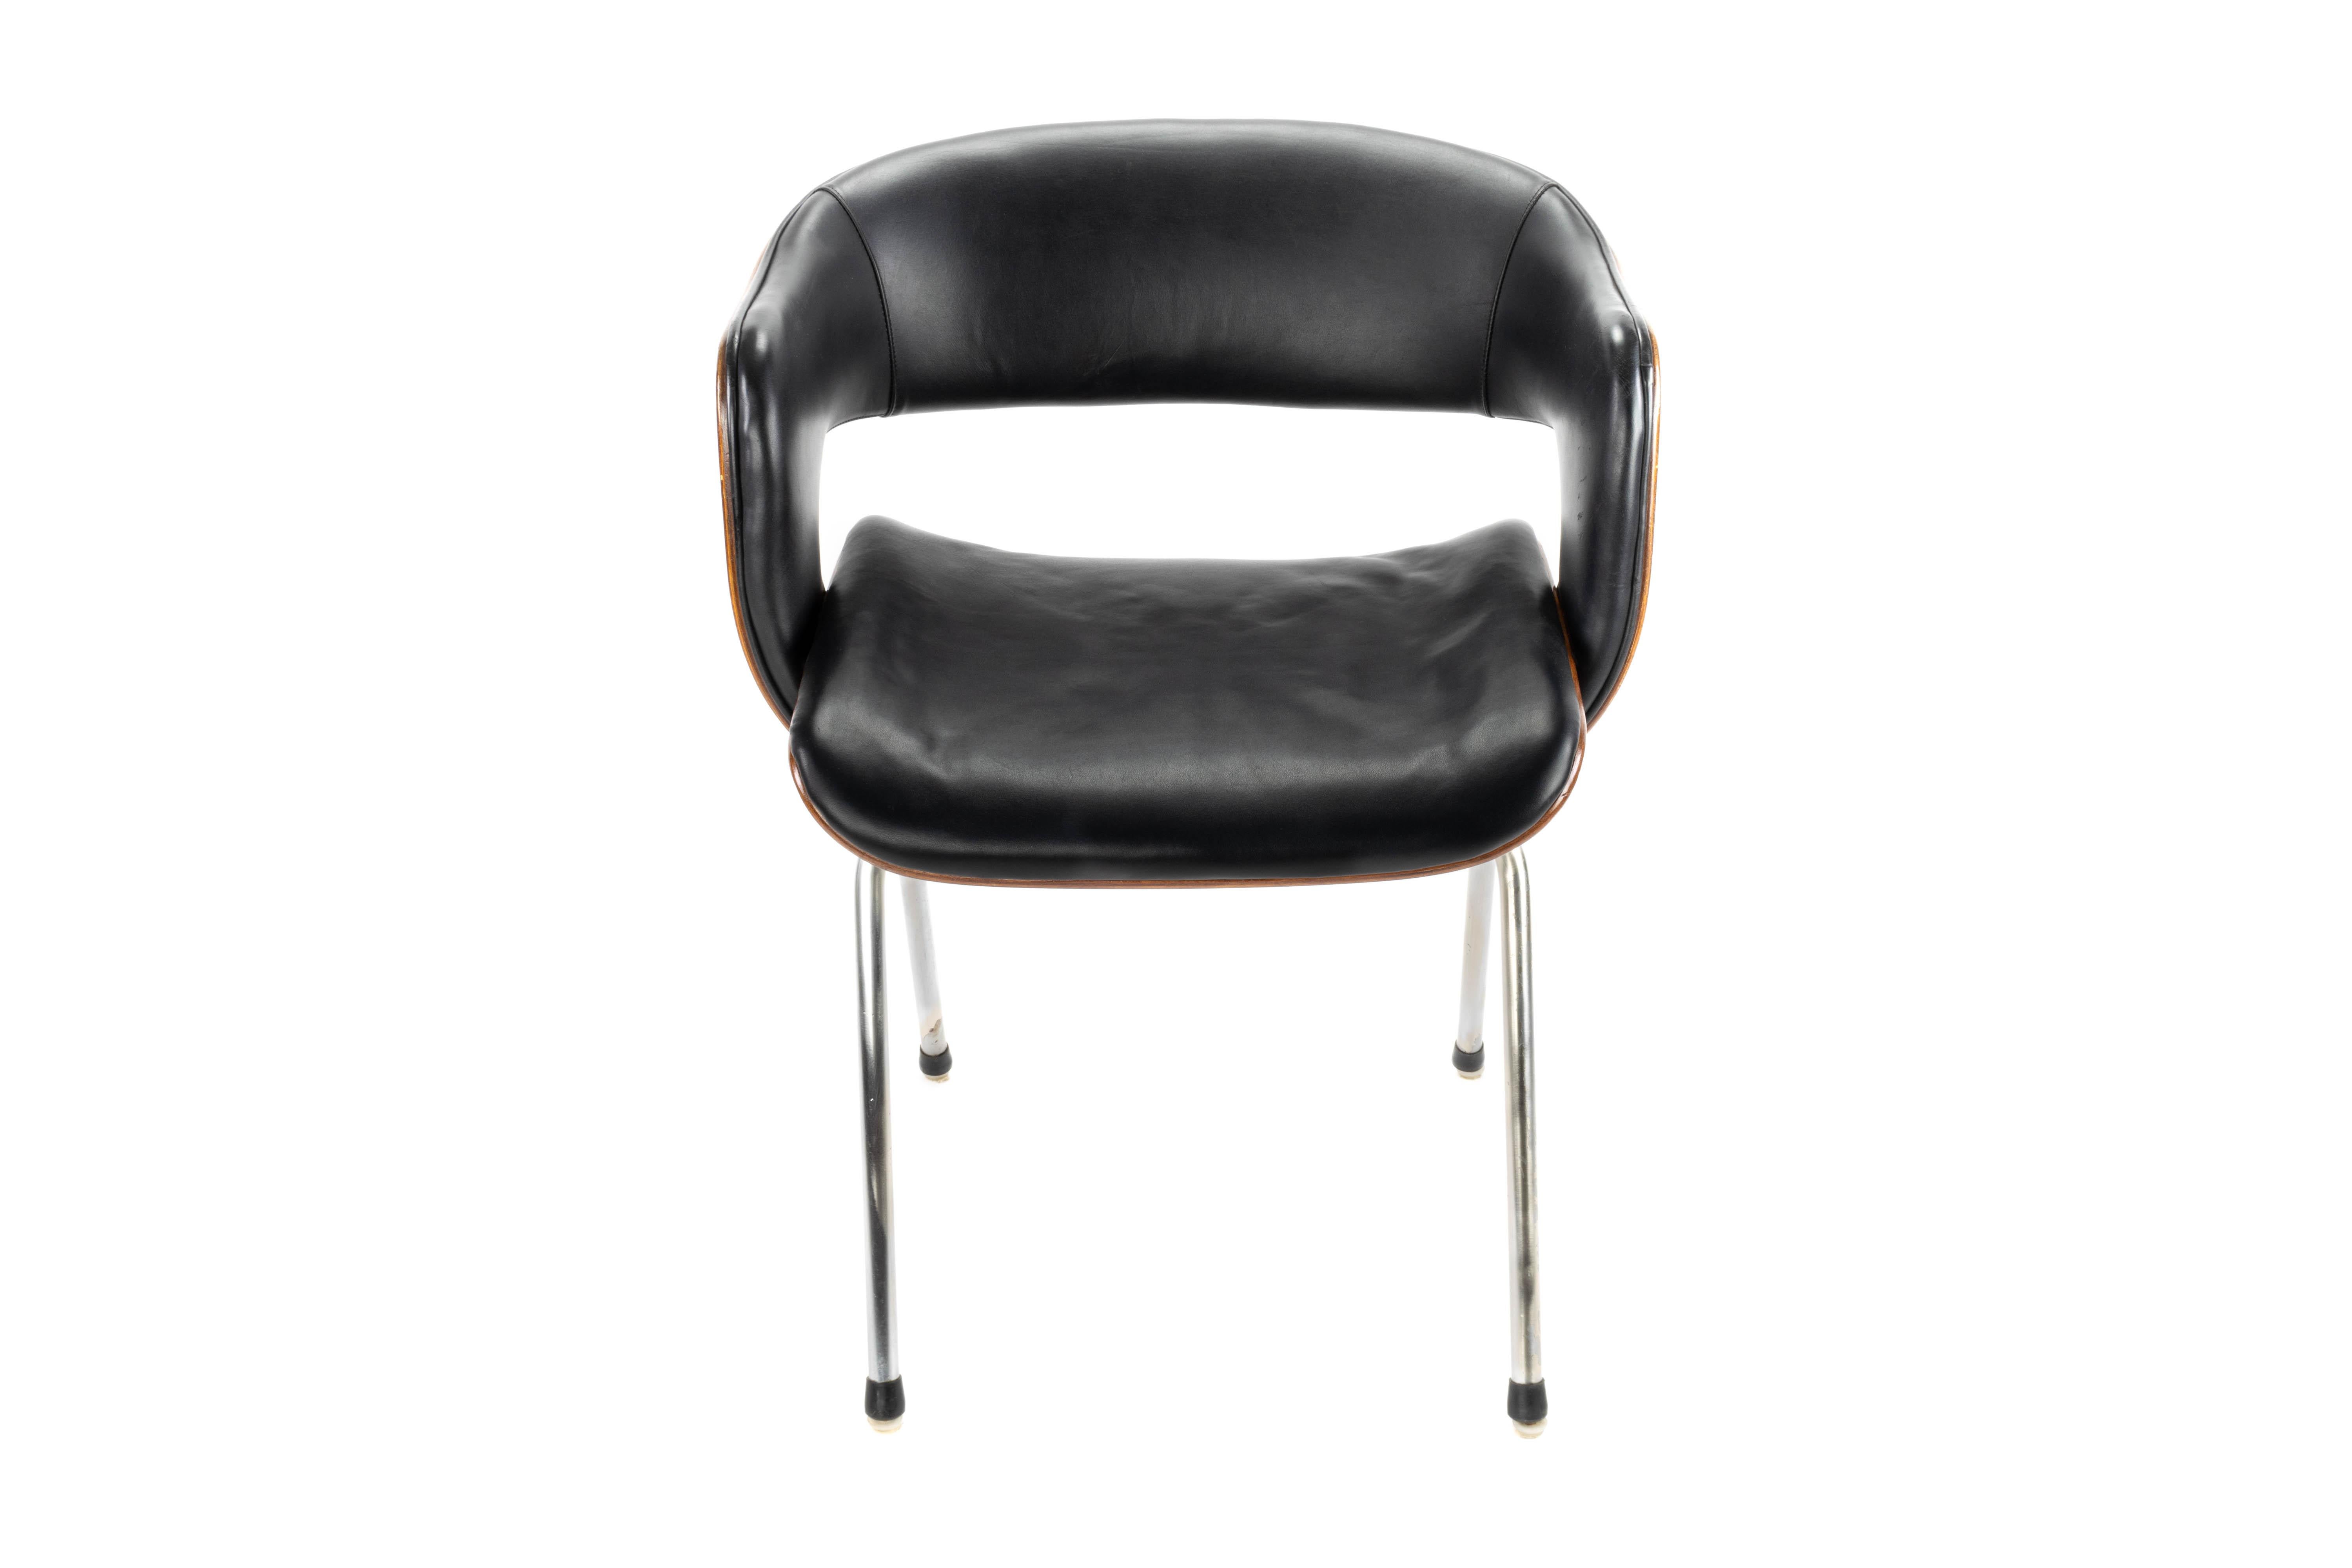 Martin Grierson black leather and rosewood Spanish Oxford chair for Arflex, 1960.

- Armchair designed by Martin Grierson for Arflex in 1963
- Body in laminated rosewood
- Upholstery in black natural leather
- Legs in chromed steel
- Produced